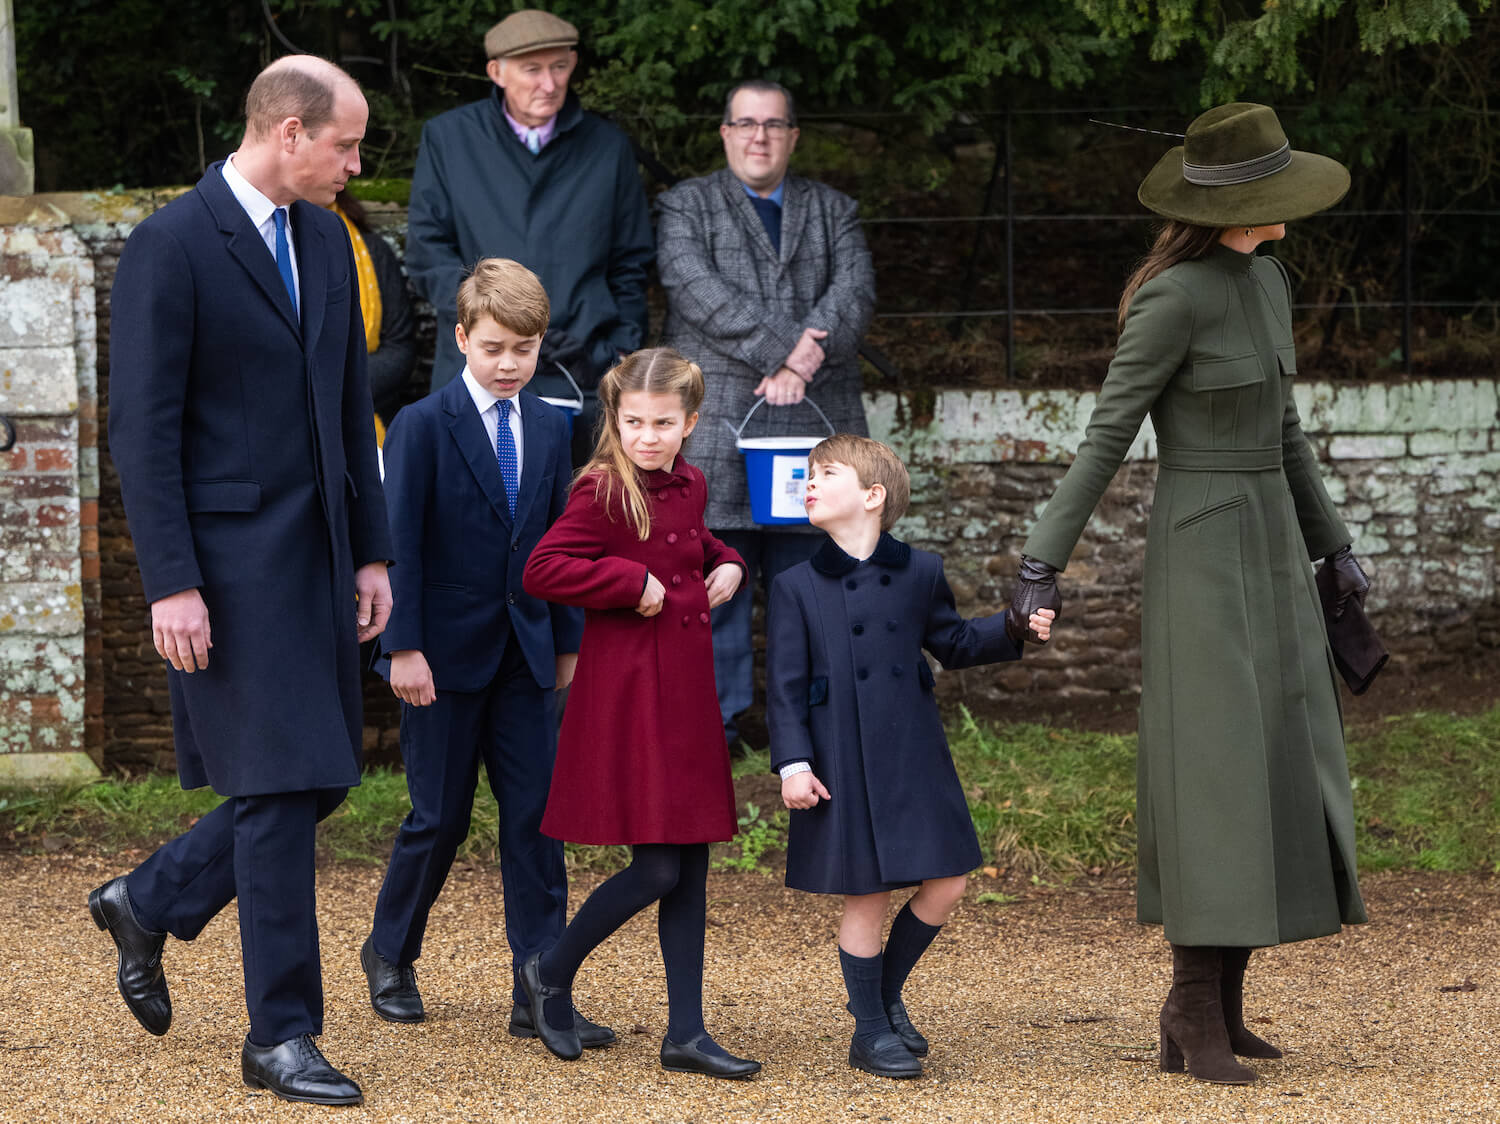 Prince William looks down at children Prince George, Princess Charlotte, and Prince Louis, while walking with Kate Middleton